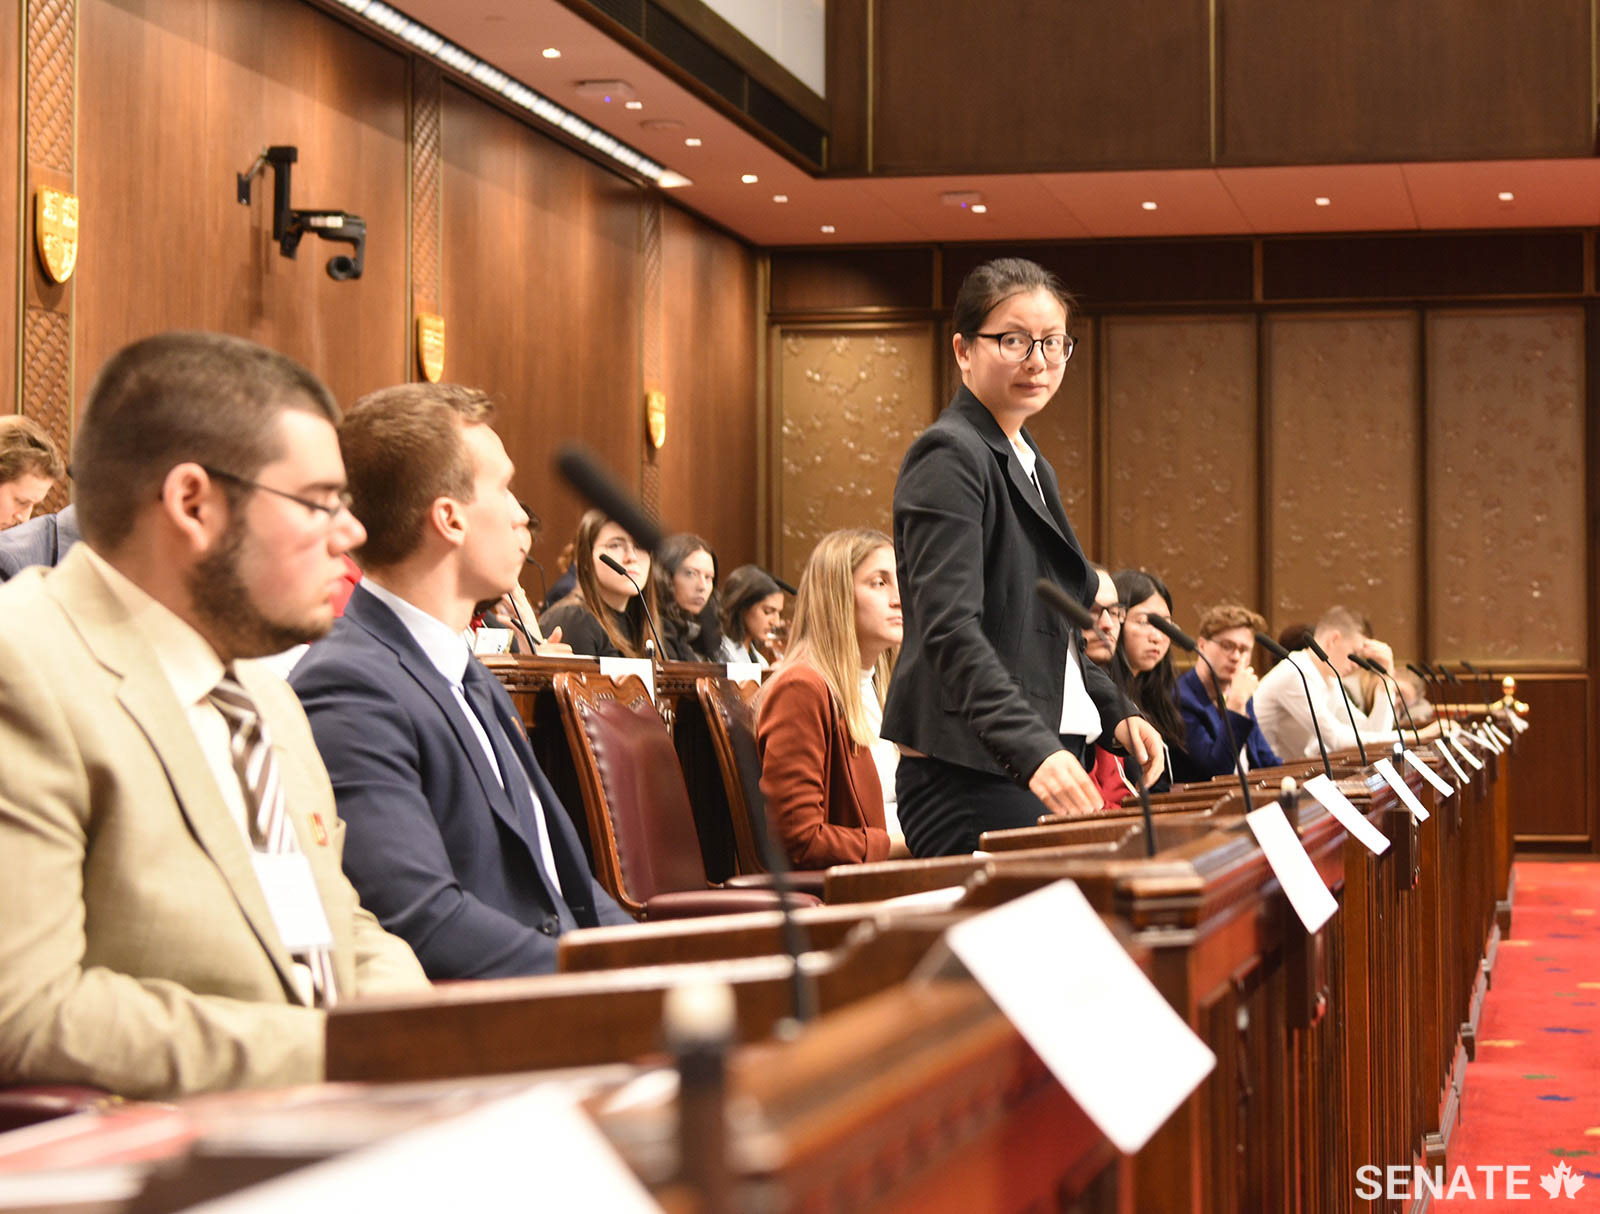 A model Senate participant pauses during her speech in the Red Chamber. About 60 students from the University of Ottawa, Carleton University and the Université du Québec en Outaouais took part in the event.